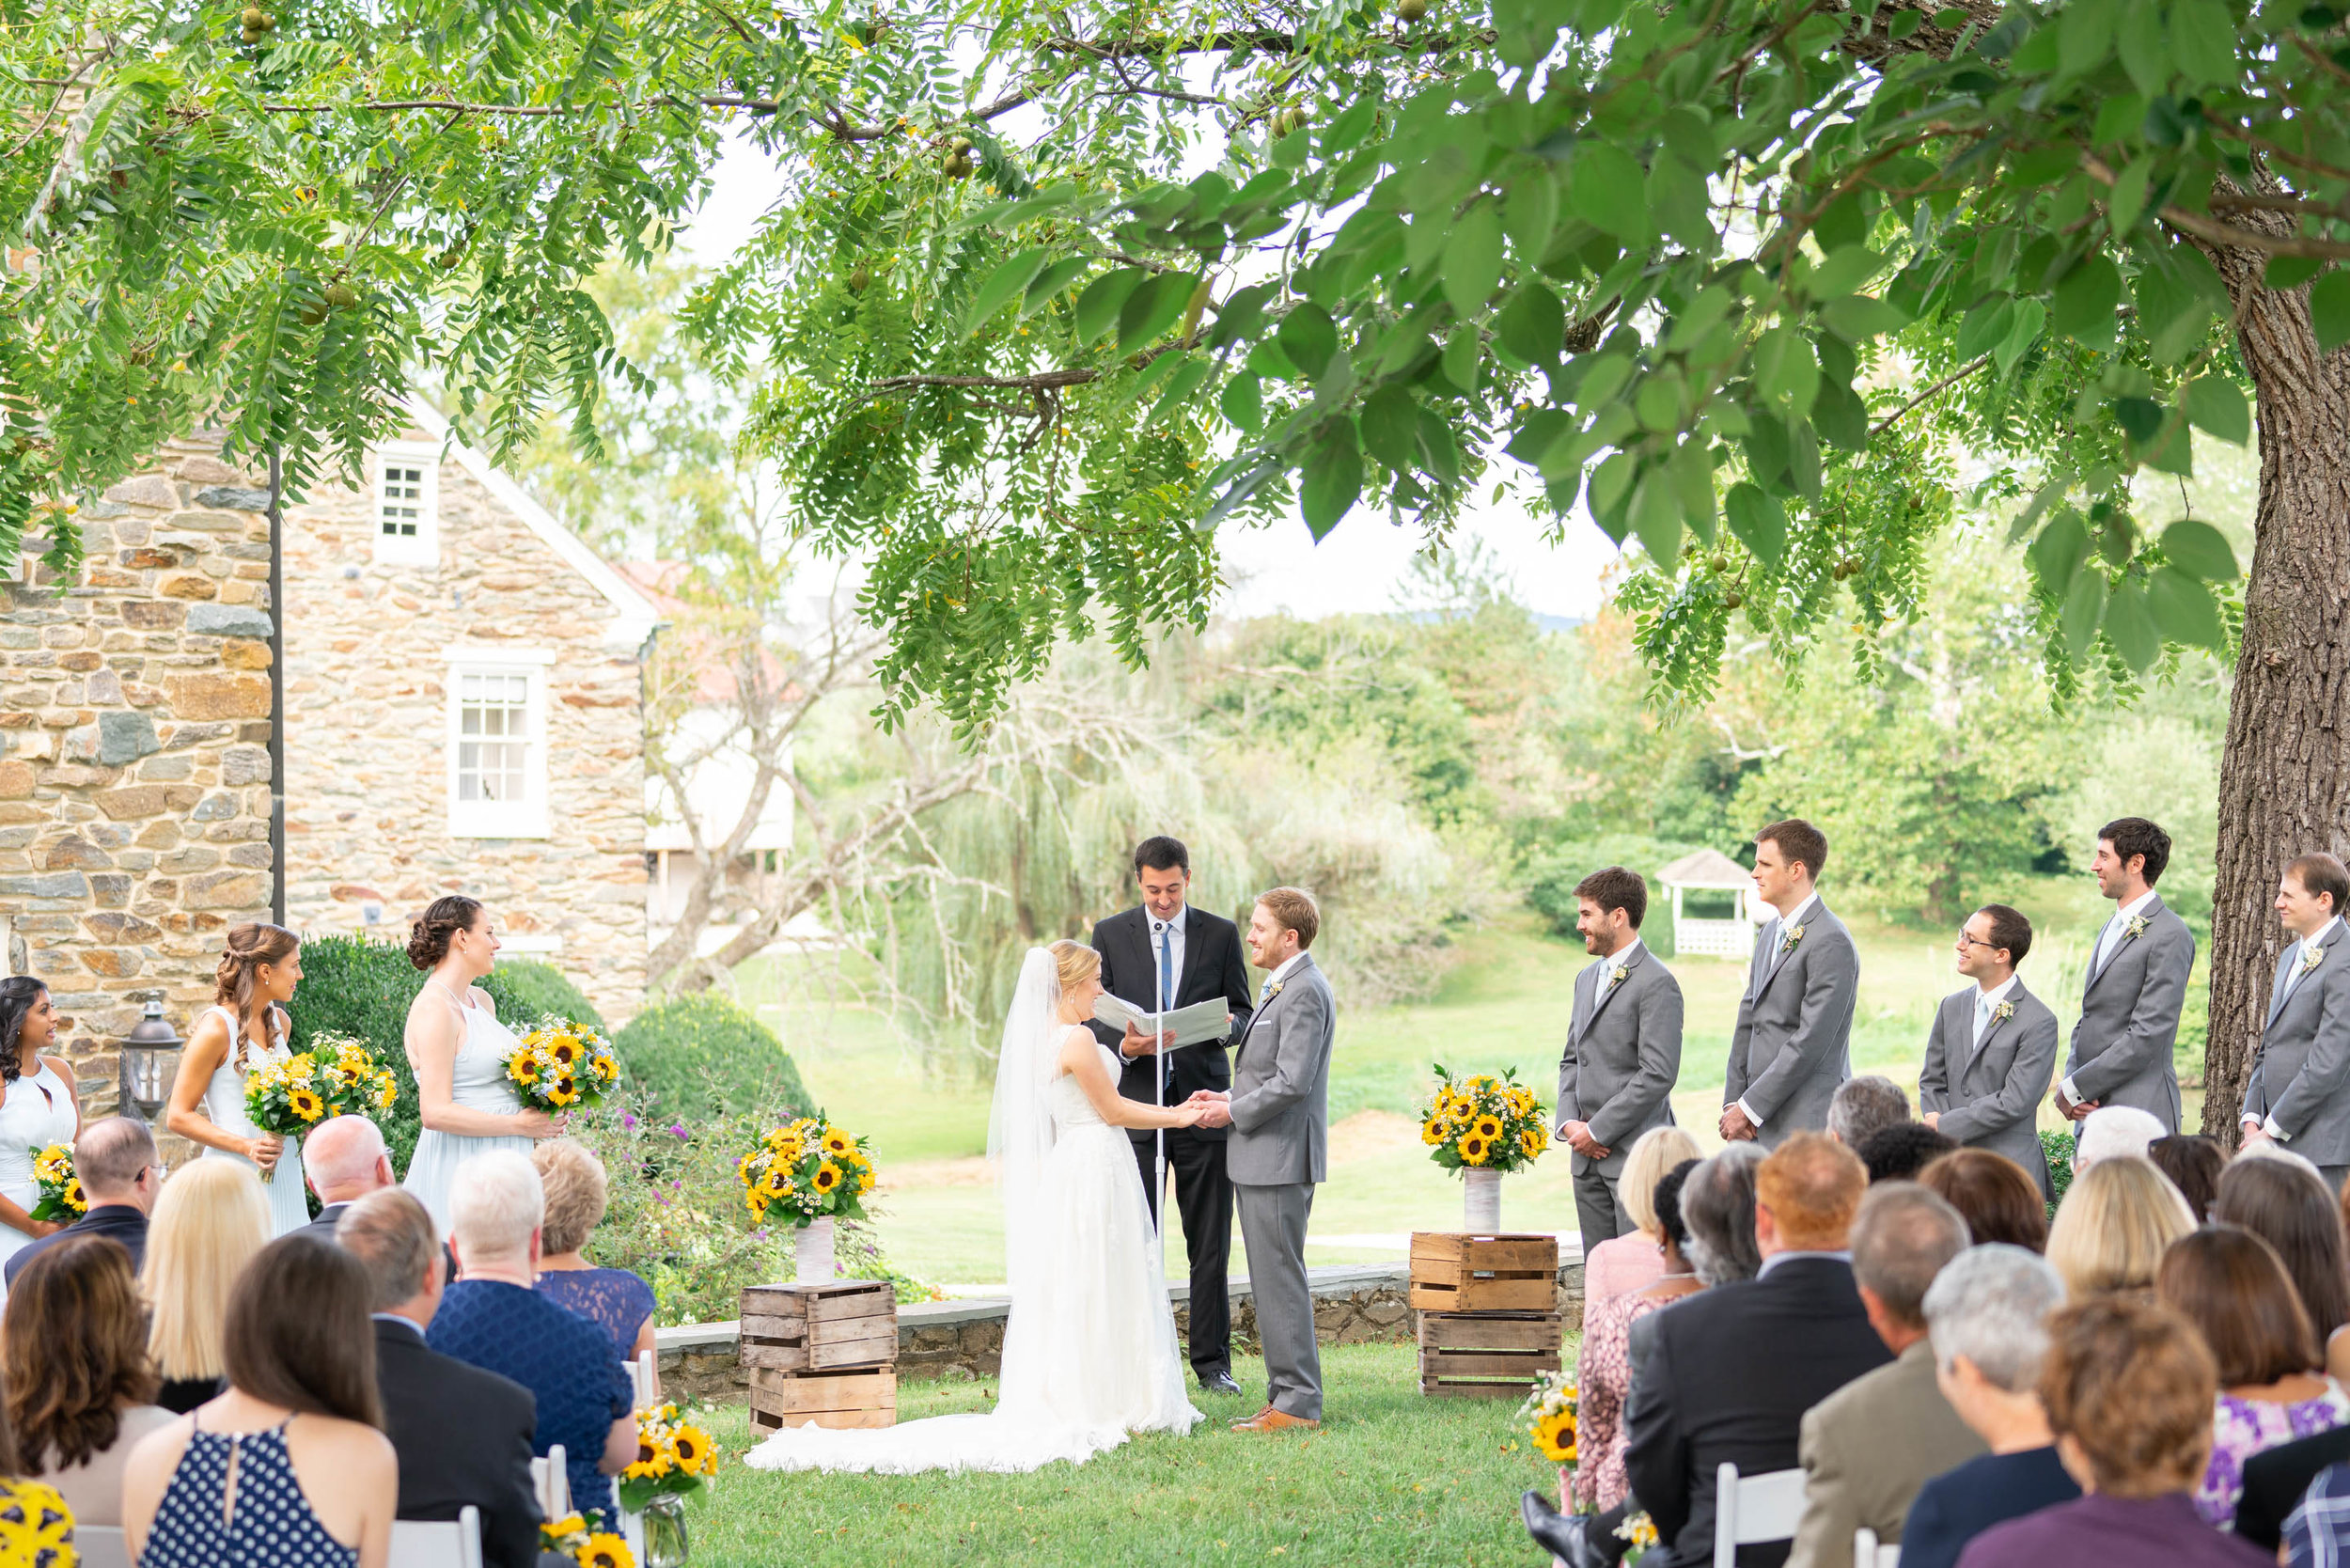 Outdoor ceremony overlooking lake at Stone Manor Country Club wedding